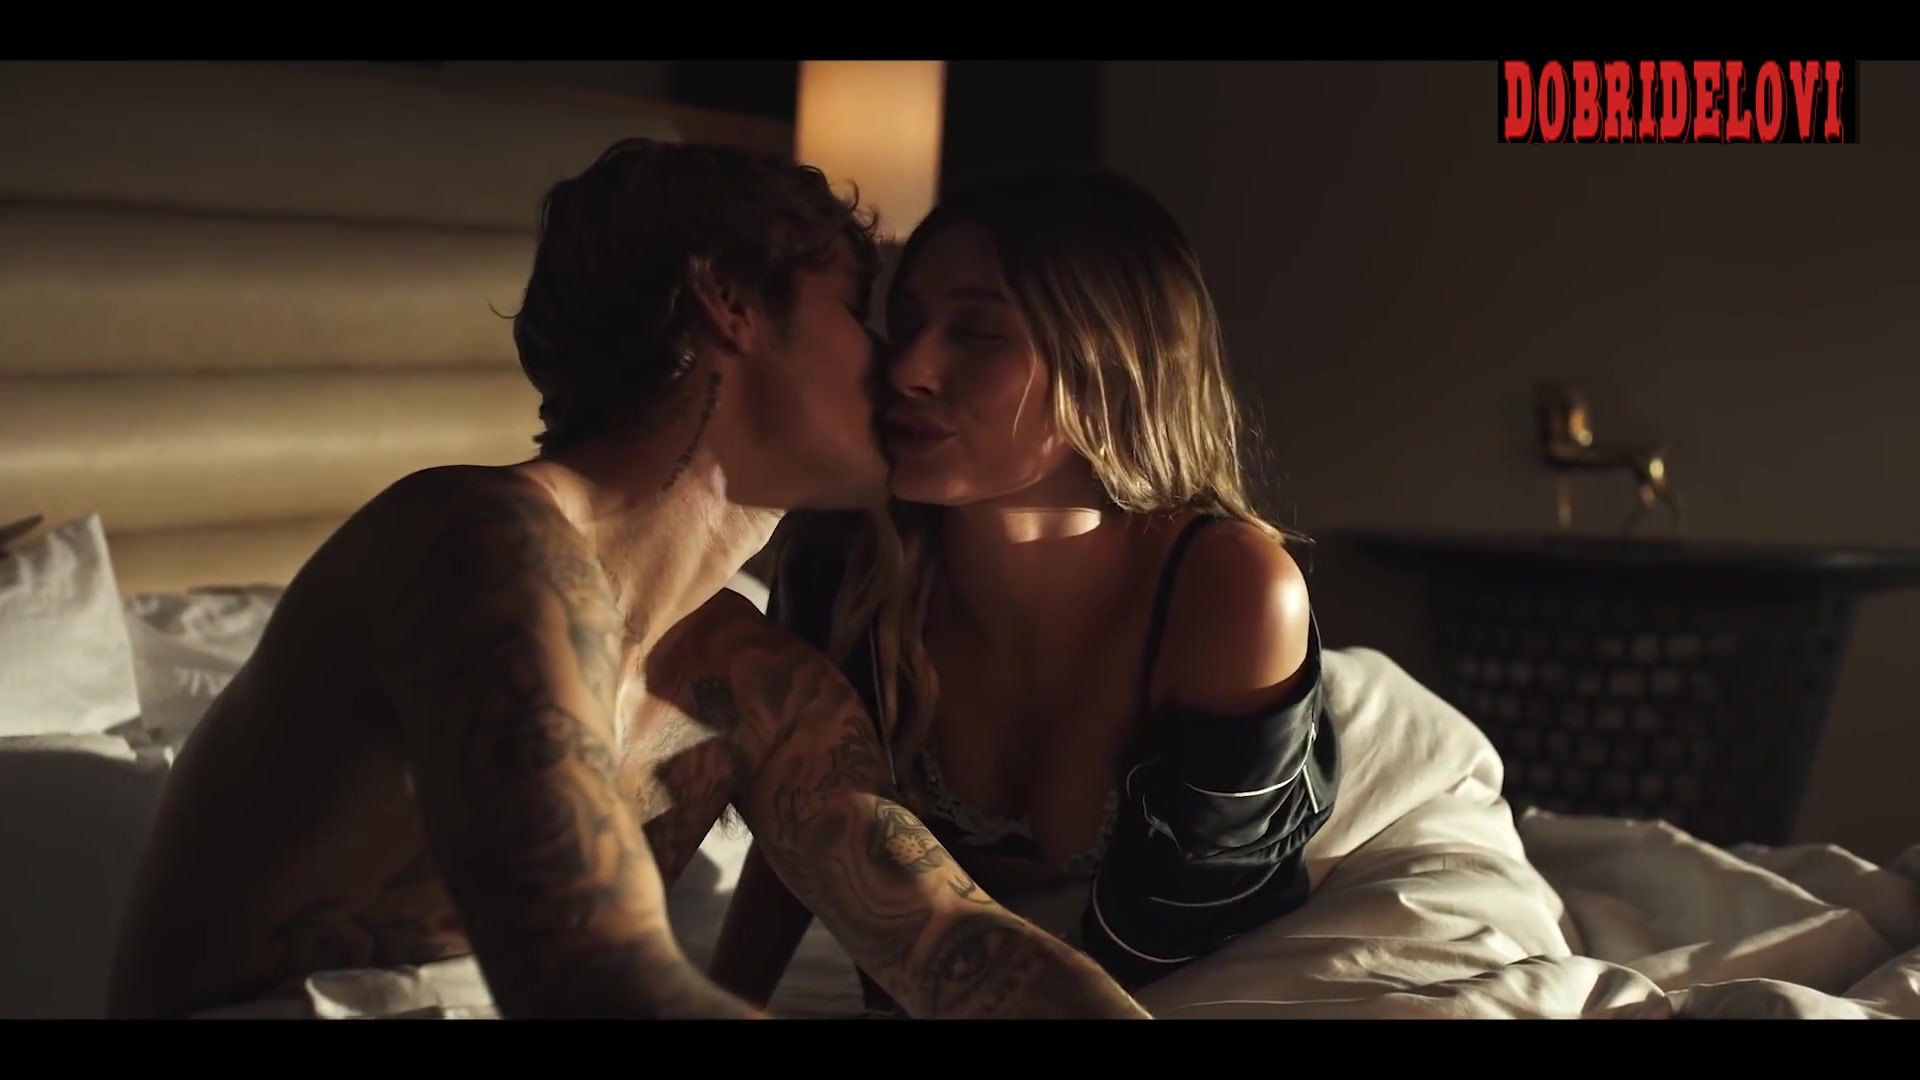 Hailey Bieber and Justin Bieber wake up scene from POPSTAR